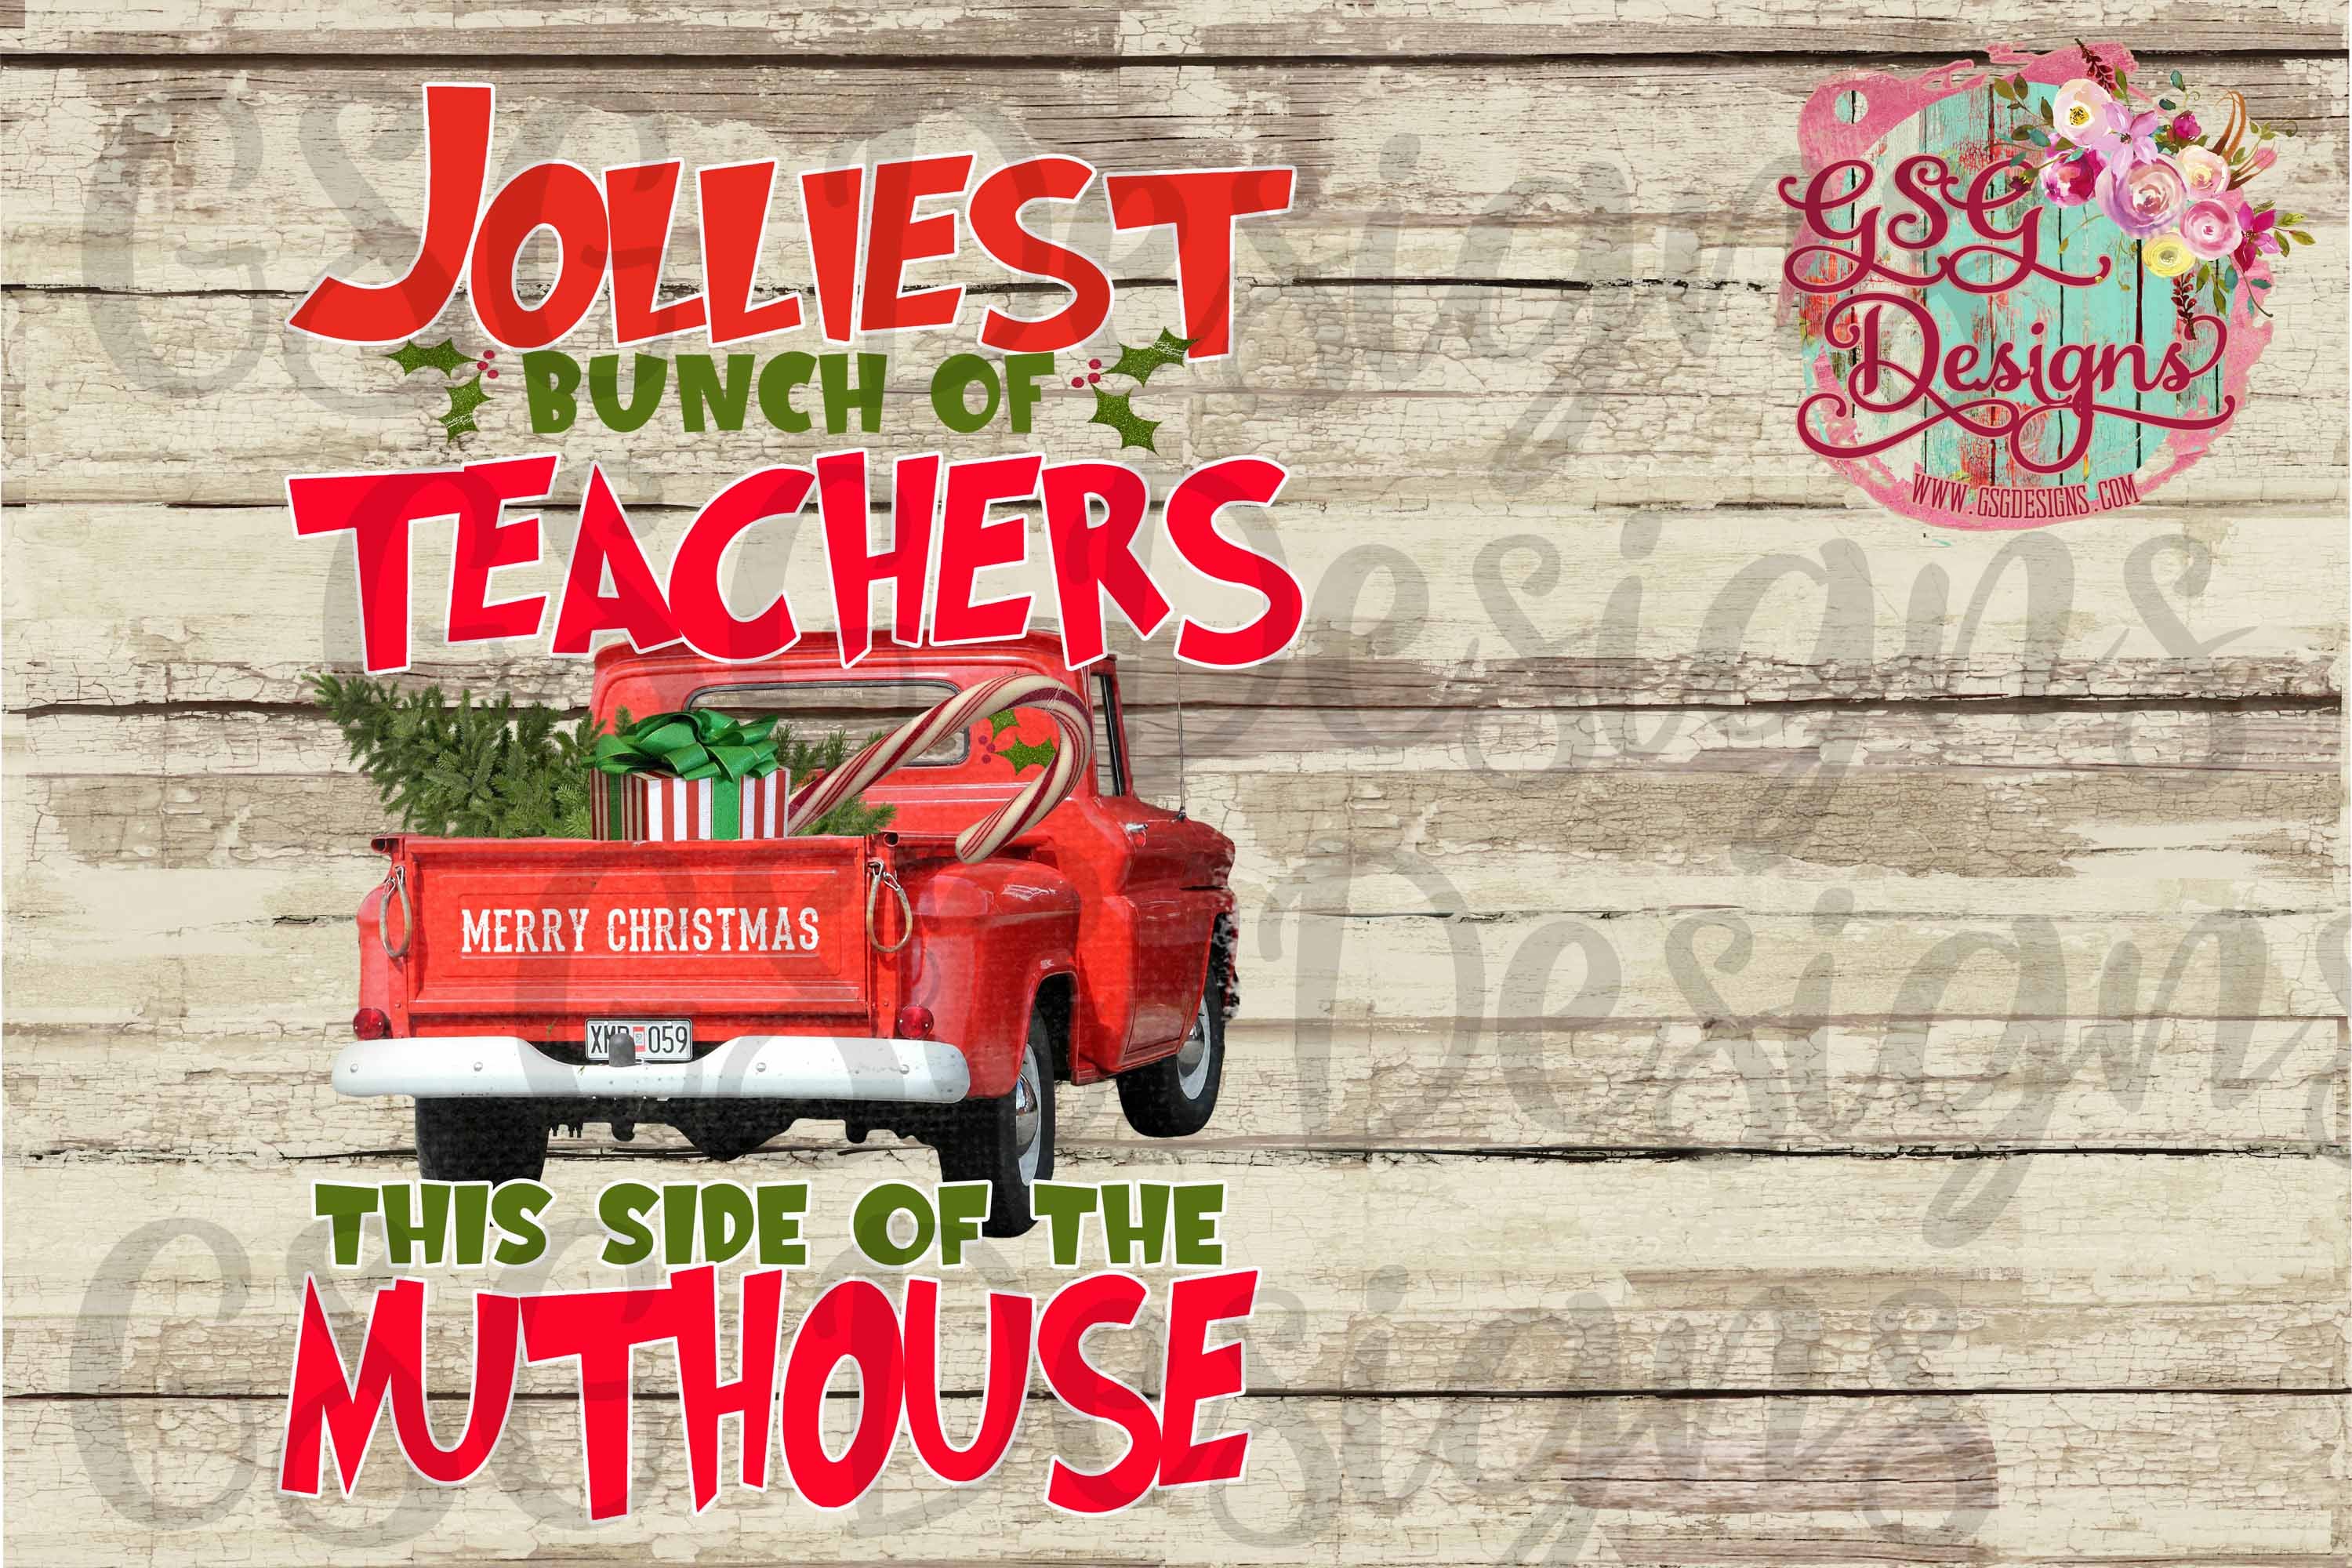 Jolliest Bunch of Teachers This Side of the Nuthouse Christmas Digital Design File